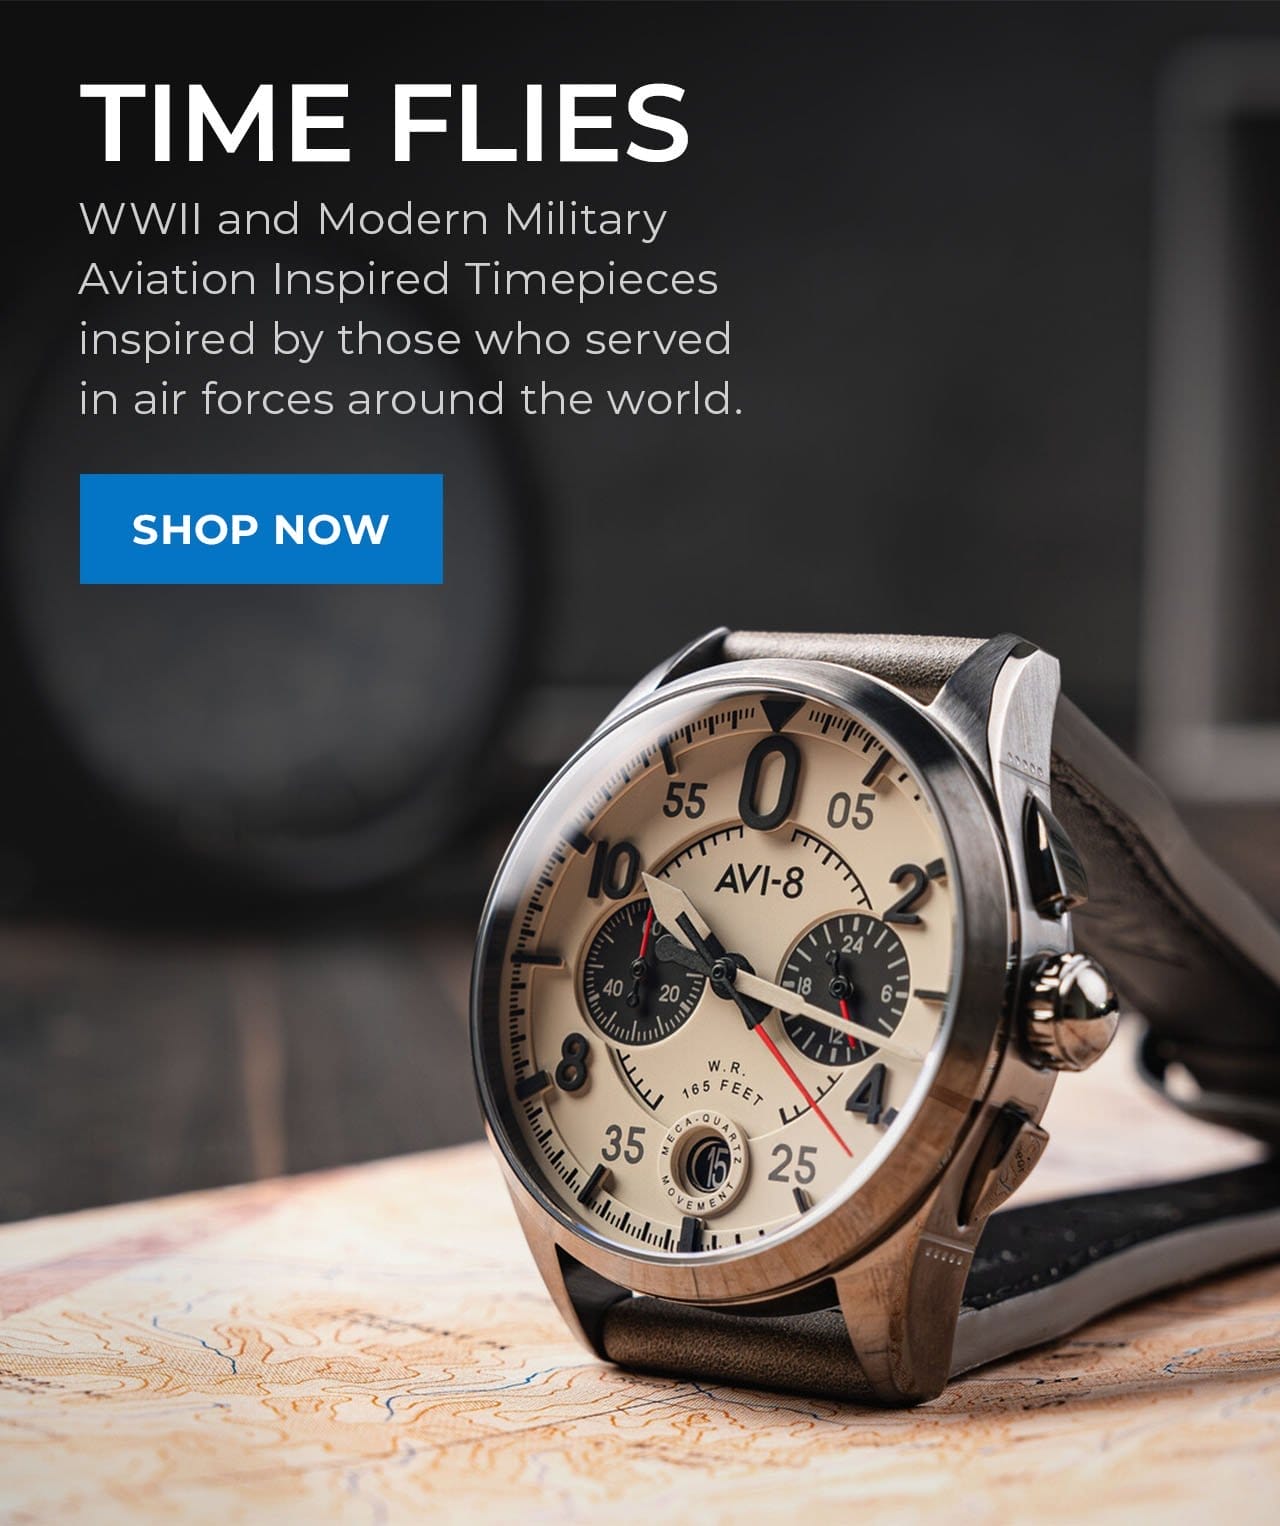 Aviation-Inspired Timepieces | SHOP NOW